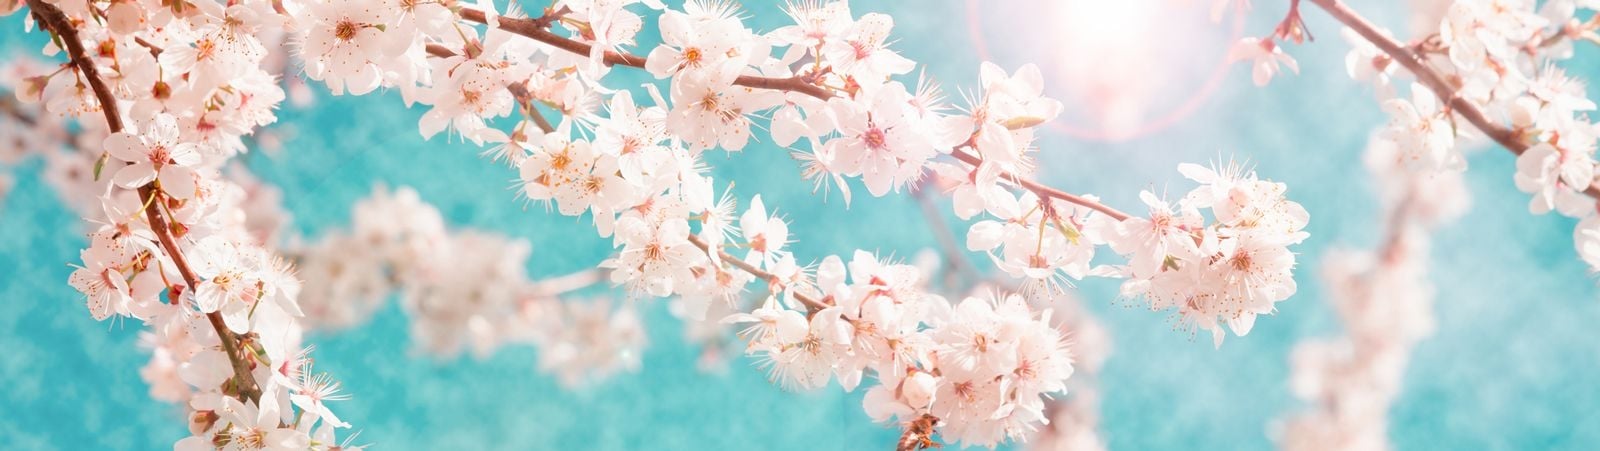 Cherry blossom branches against a pale blue background